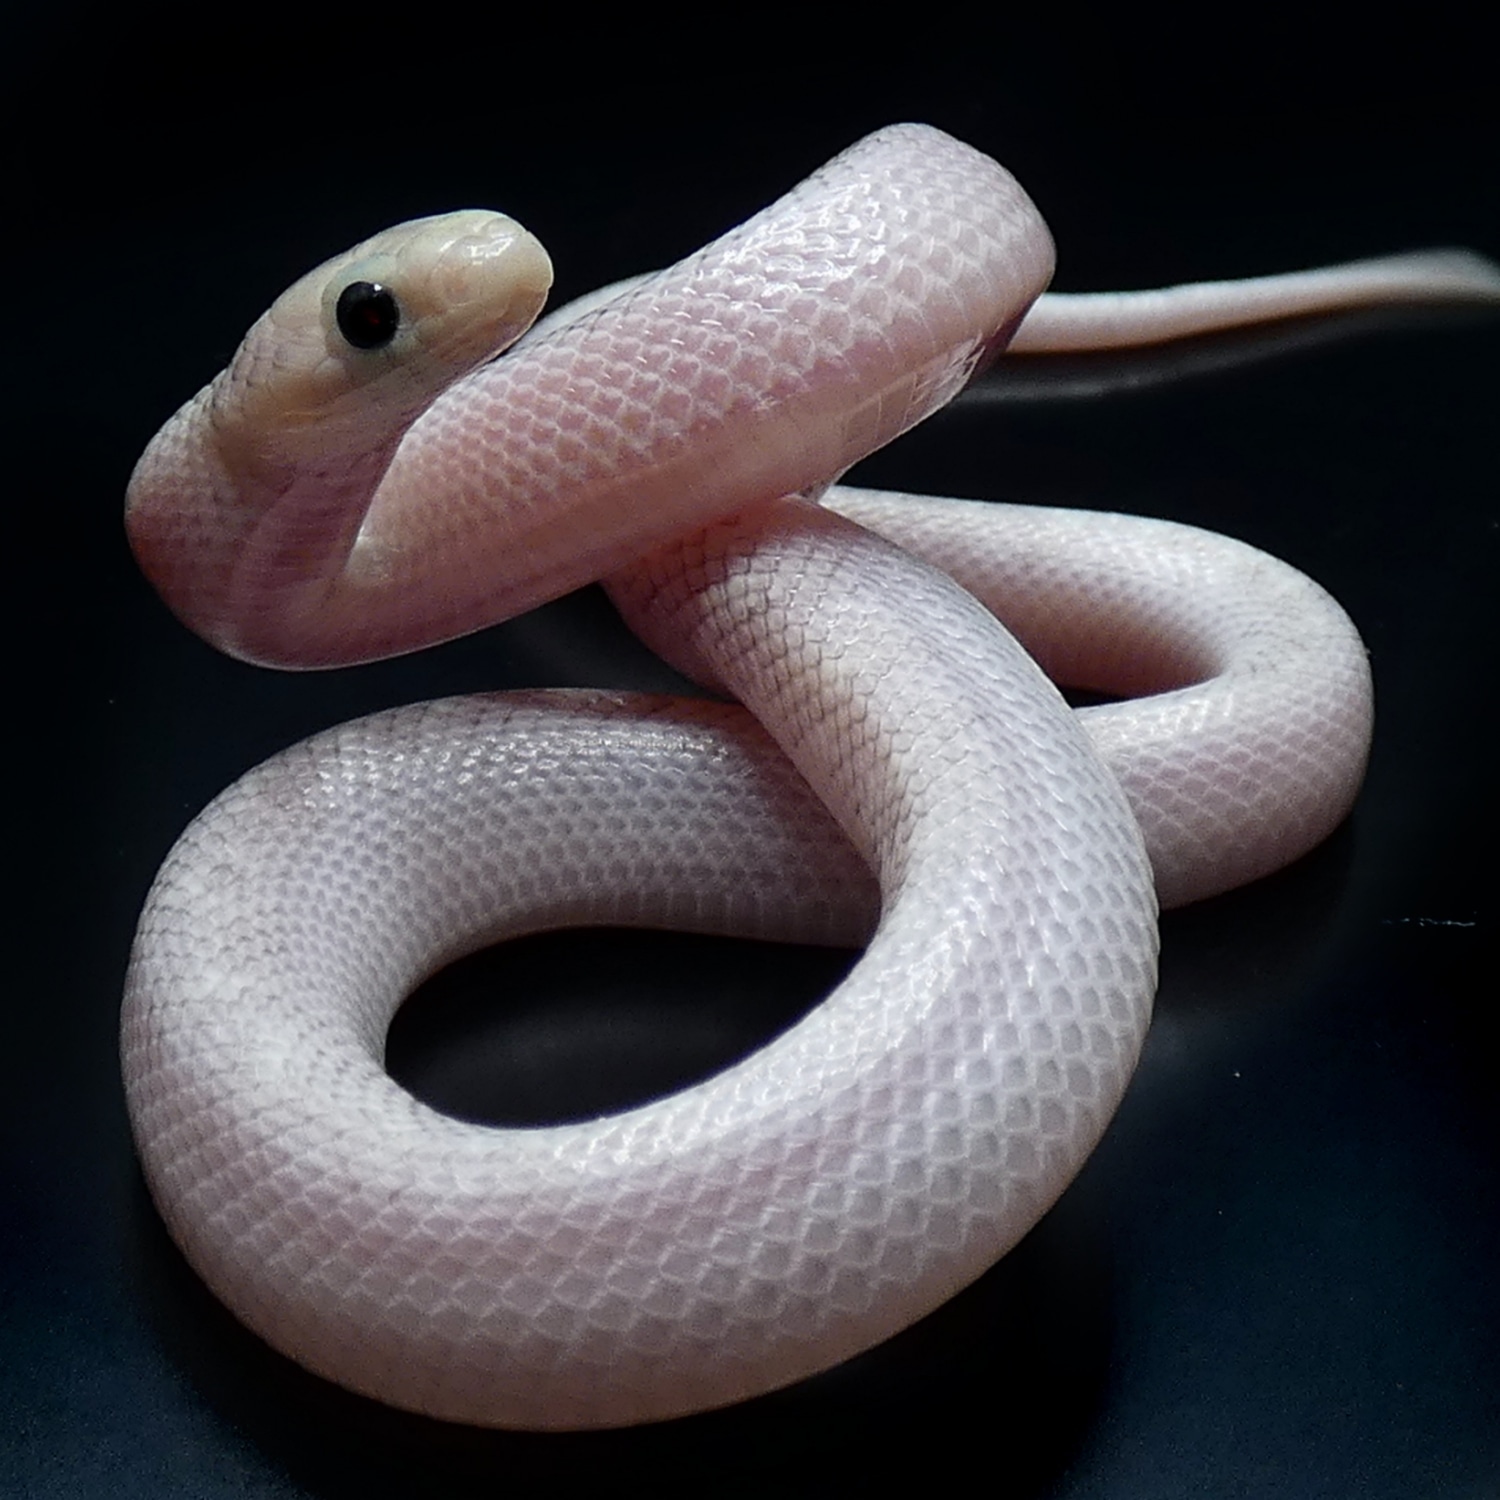 Whitesided Ghost Florida Kingsnake by Creatures of Nightshade